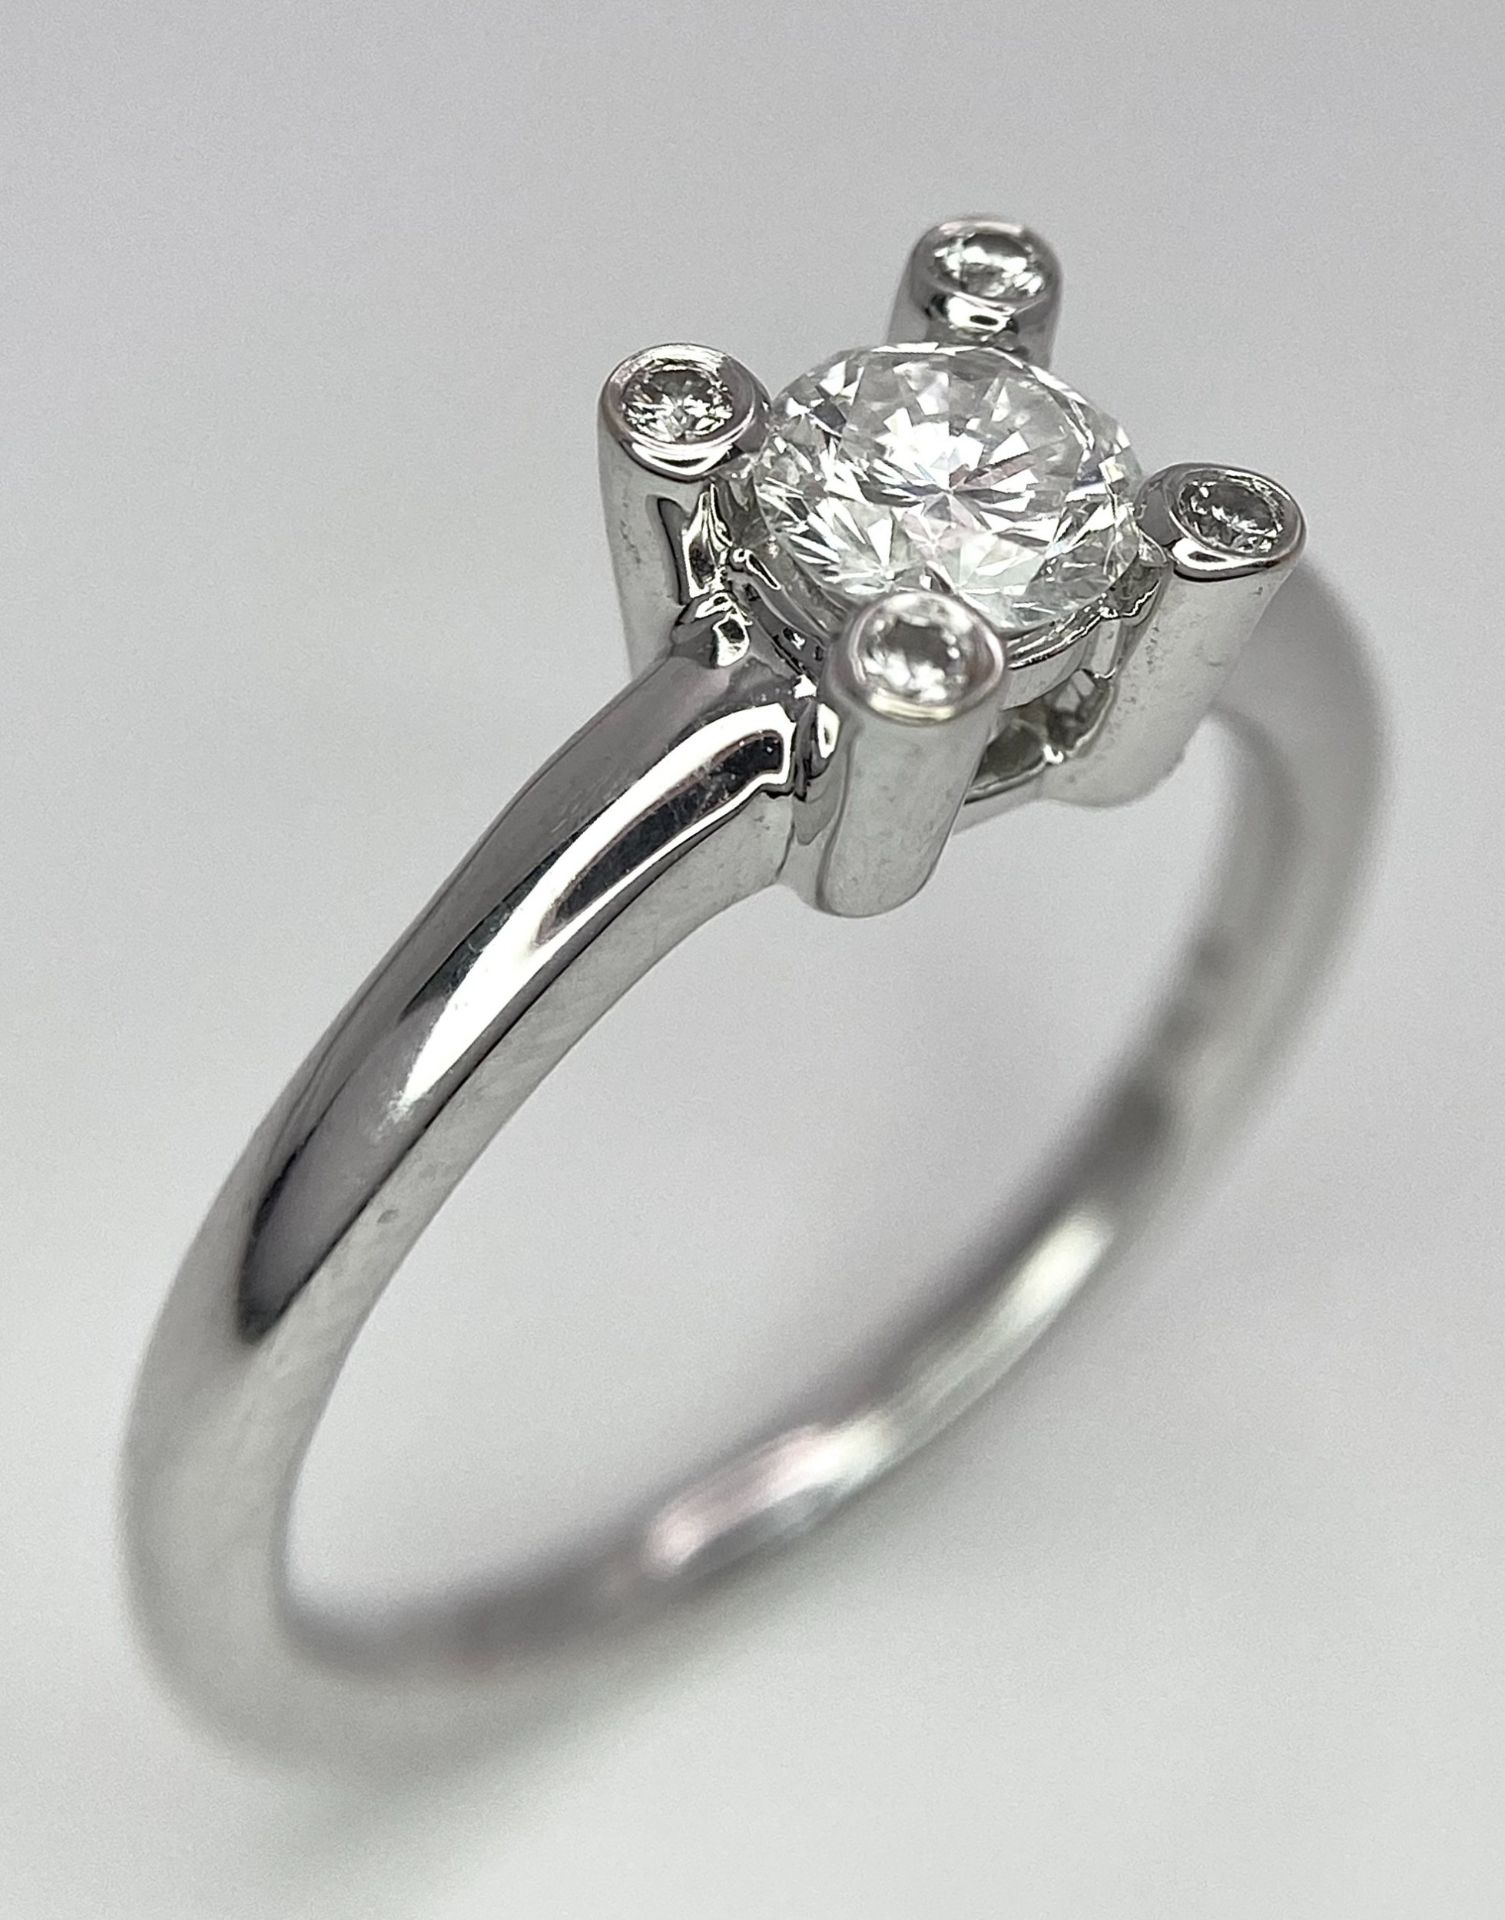 AN 18K WHITE GOLD DIAMOND SOLITAIRE RING WITH FOUR DIAMOND TURRETS - 0.50CT 4.6G. SIZE M 1/2. - Image 2 of 10